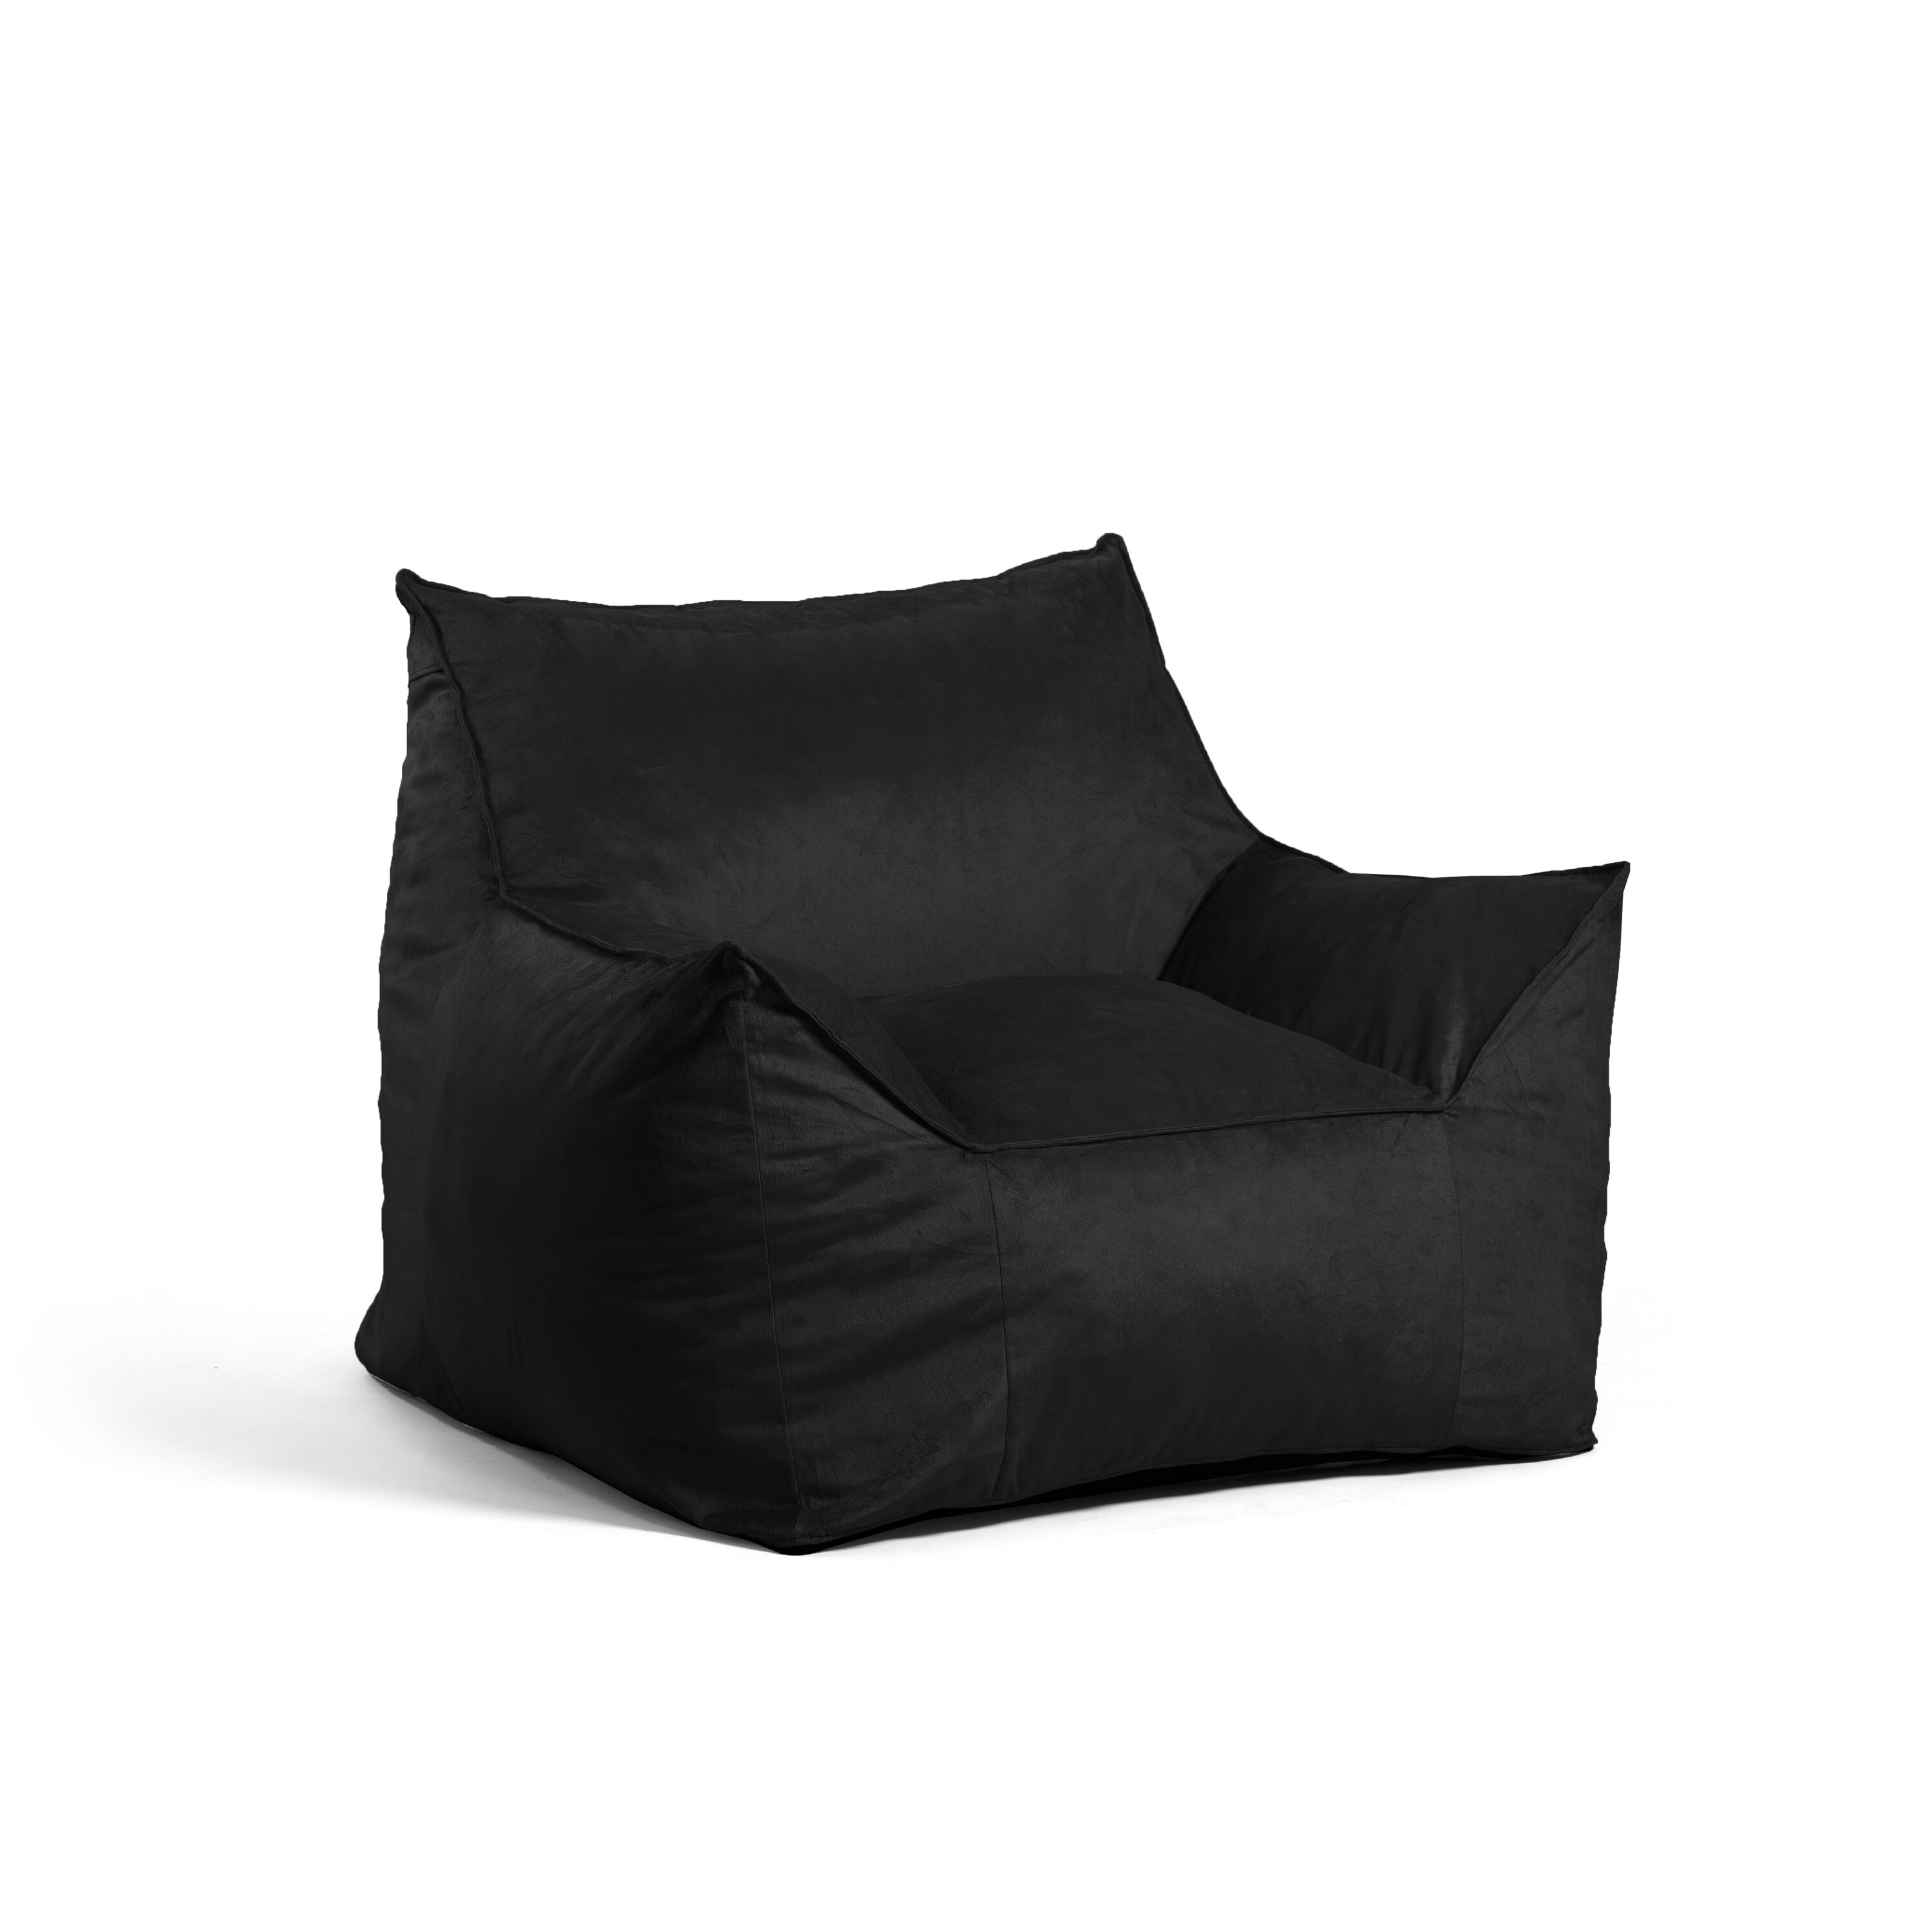 AJD Home Black Bean Bag Lounger Adult Size, Large Bean Bag Chair with  Filler Included, Big Bean Bag Chairs for Adults - On Sale - Bed Bath &  Beyond - 32351401